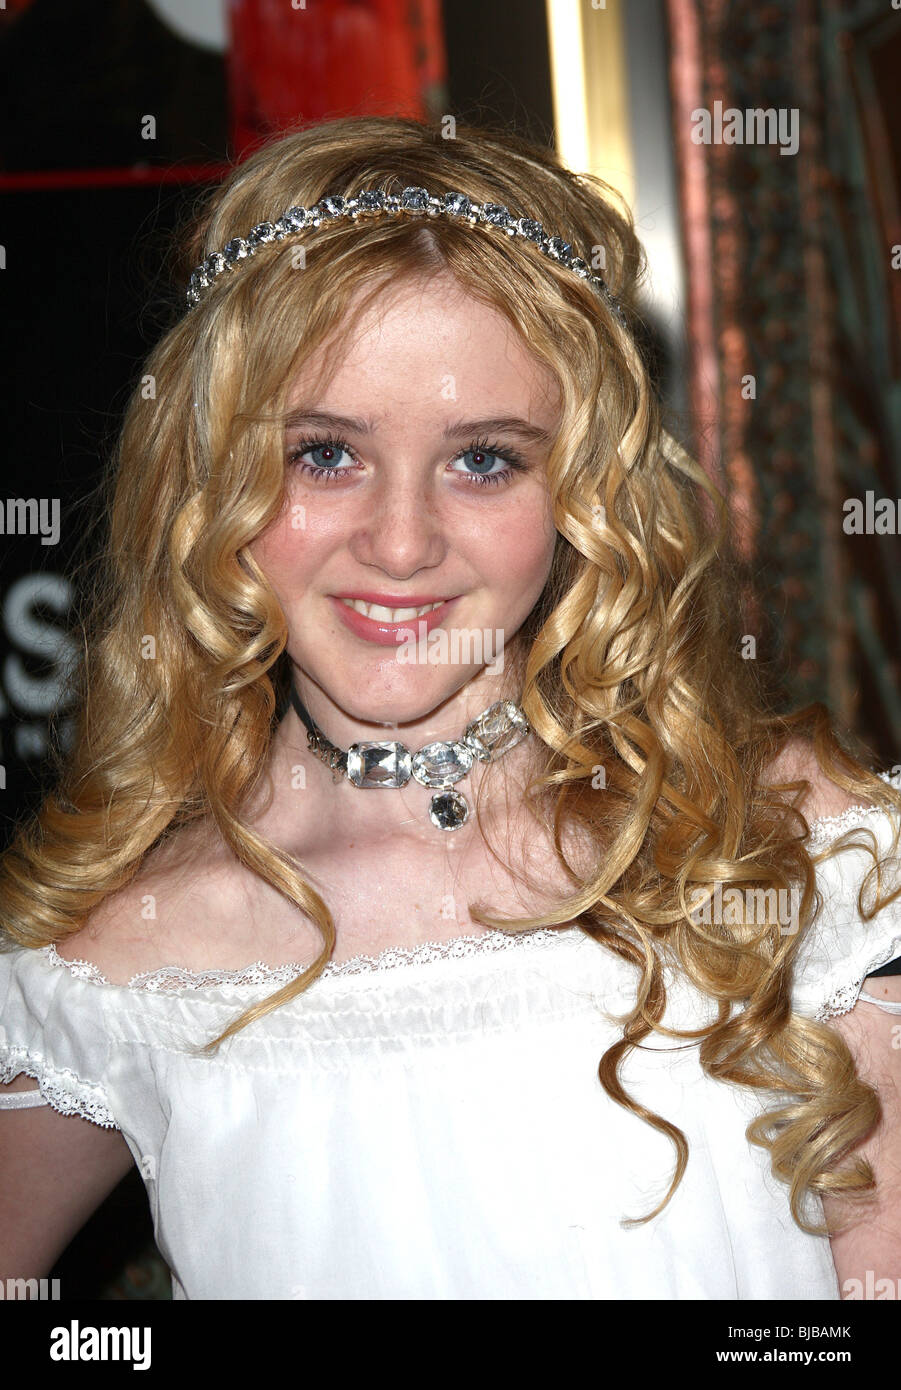 KATHRYN NEWTON CATS OPENING NIGHT PANTAGES THEATRE HOLLYWOOD LOS ANGELES CALIFORNIA USA 09 March 2010 Stock Photo